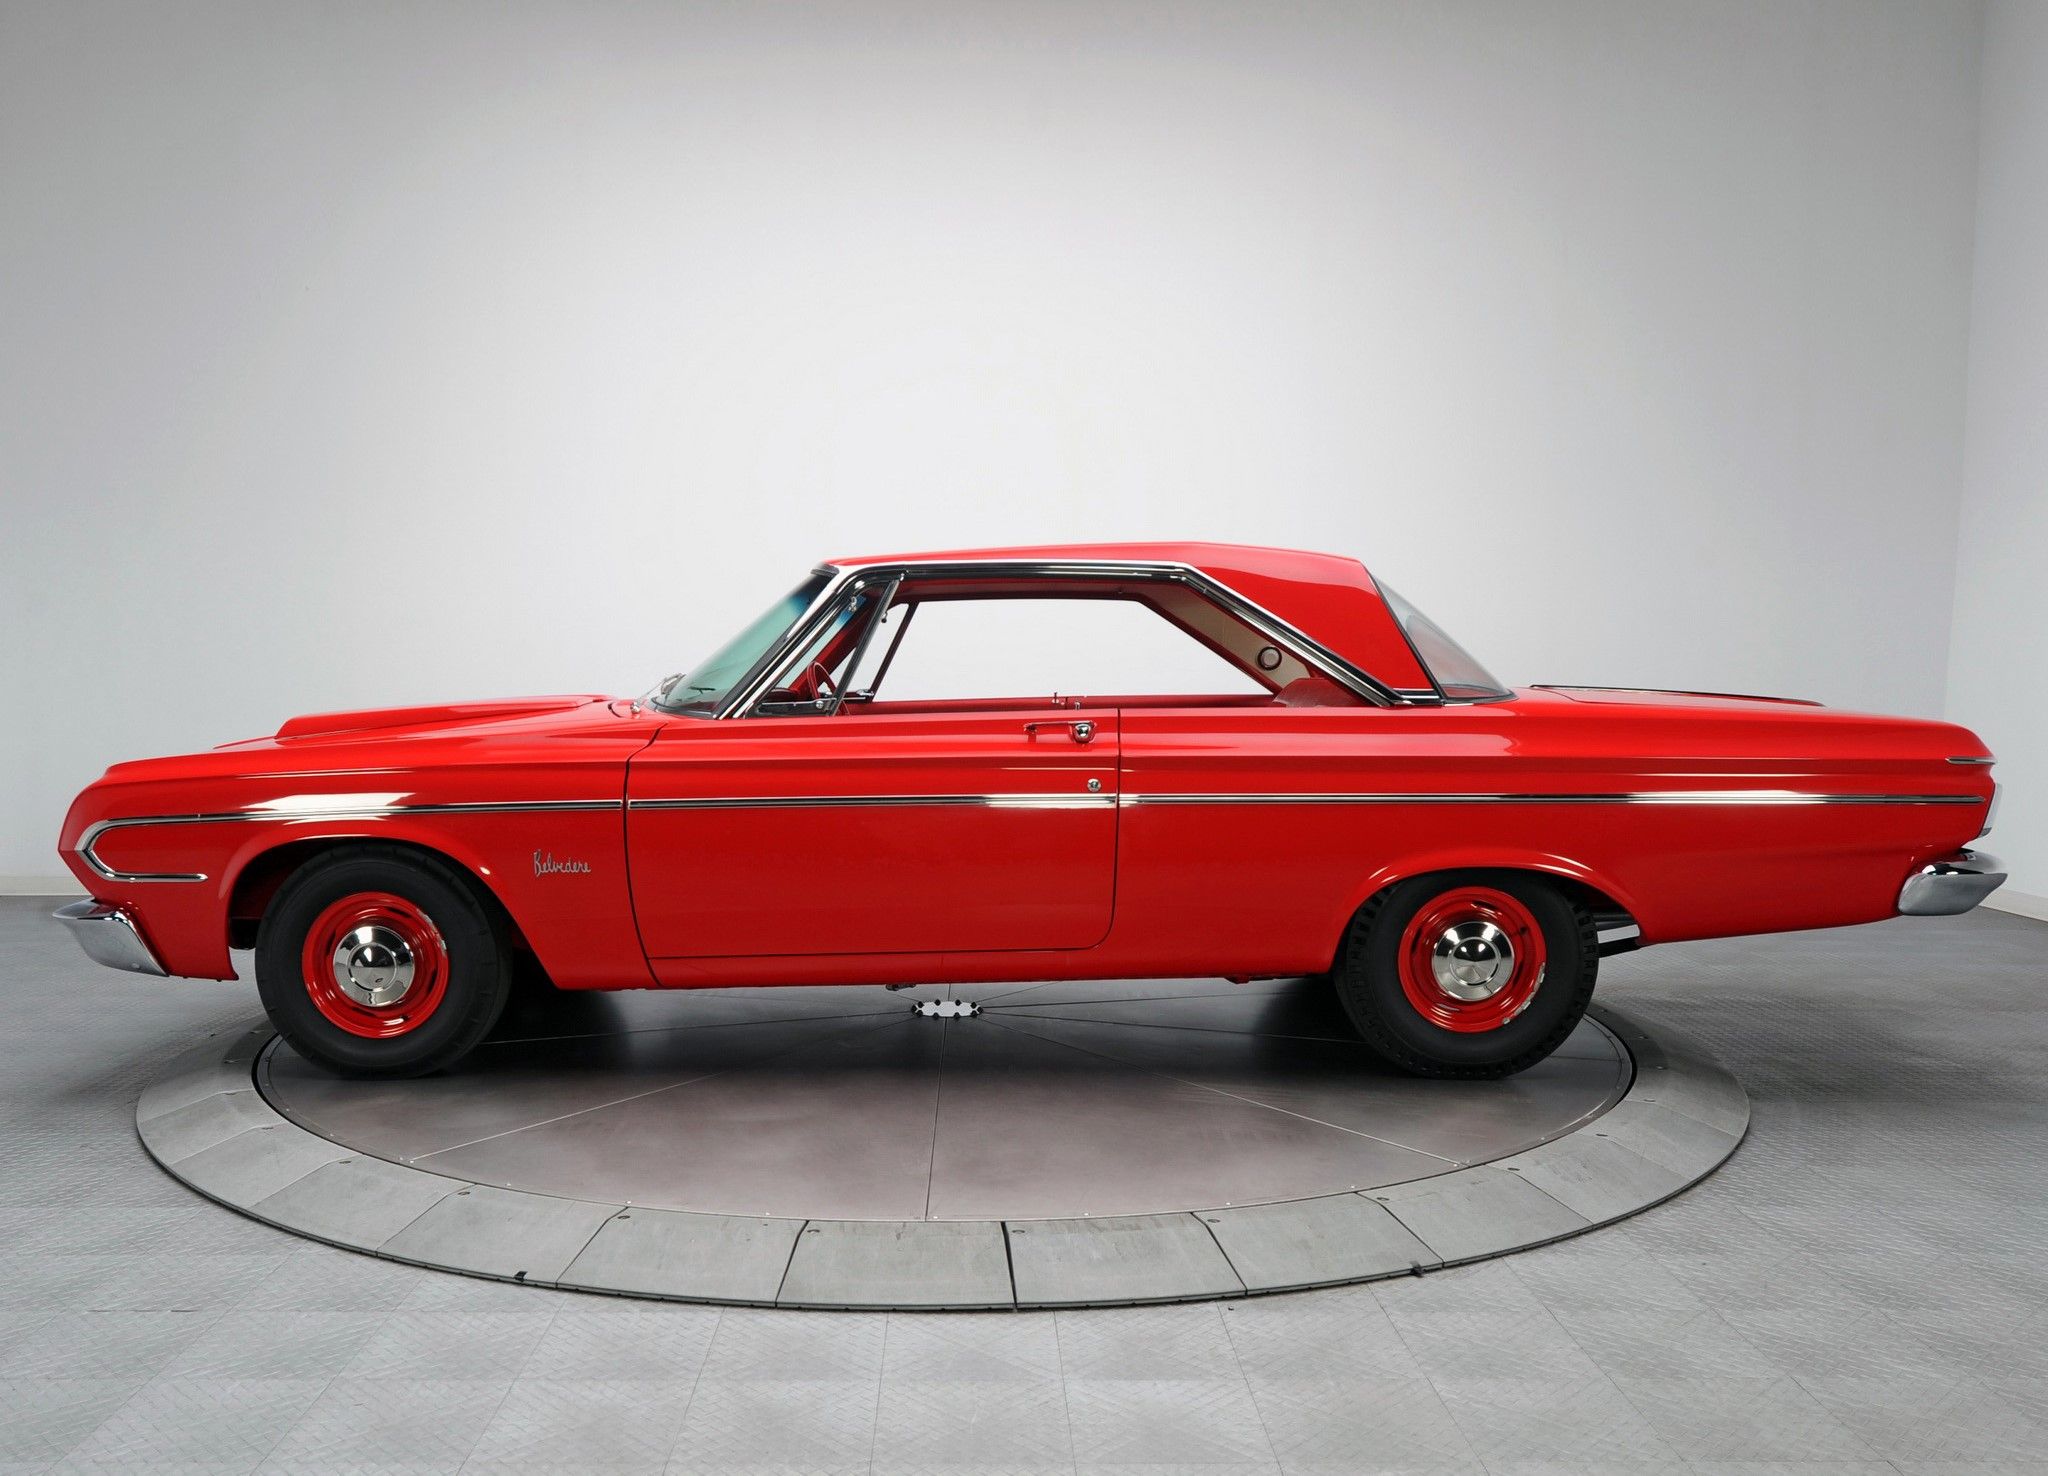 The 1964 Plymouth Belvedere side view. 